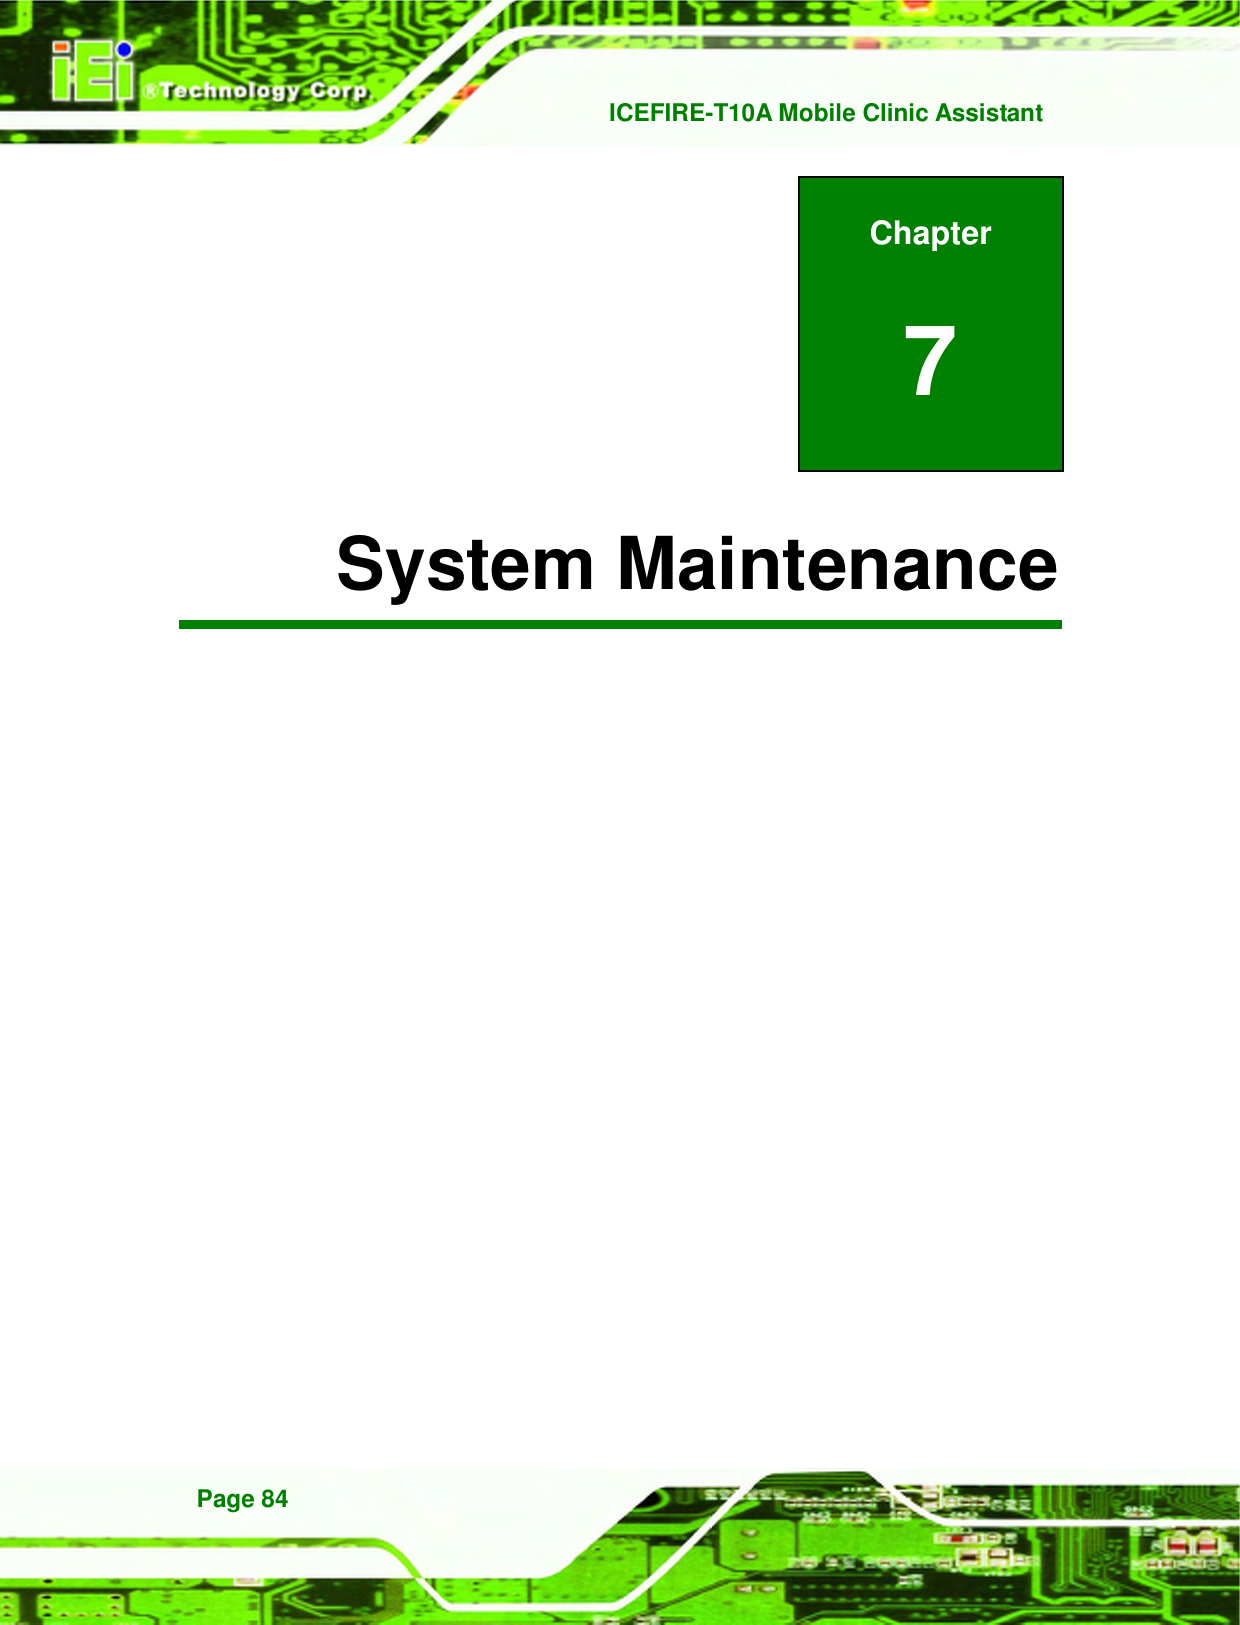   ICEFIRE-T10A Mobile Clinic Assistant Page 84 Chapter 7 7 System Maintenance 